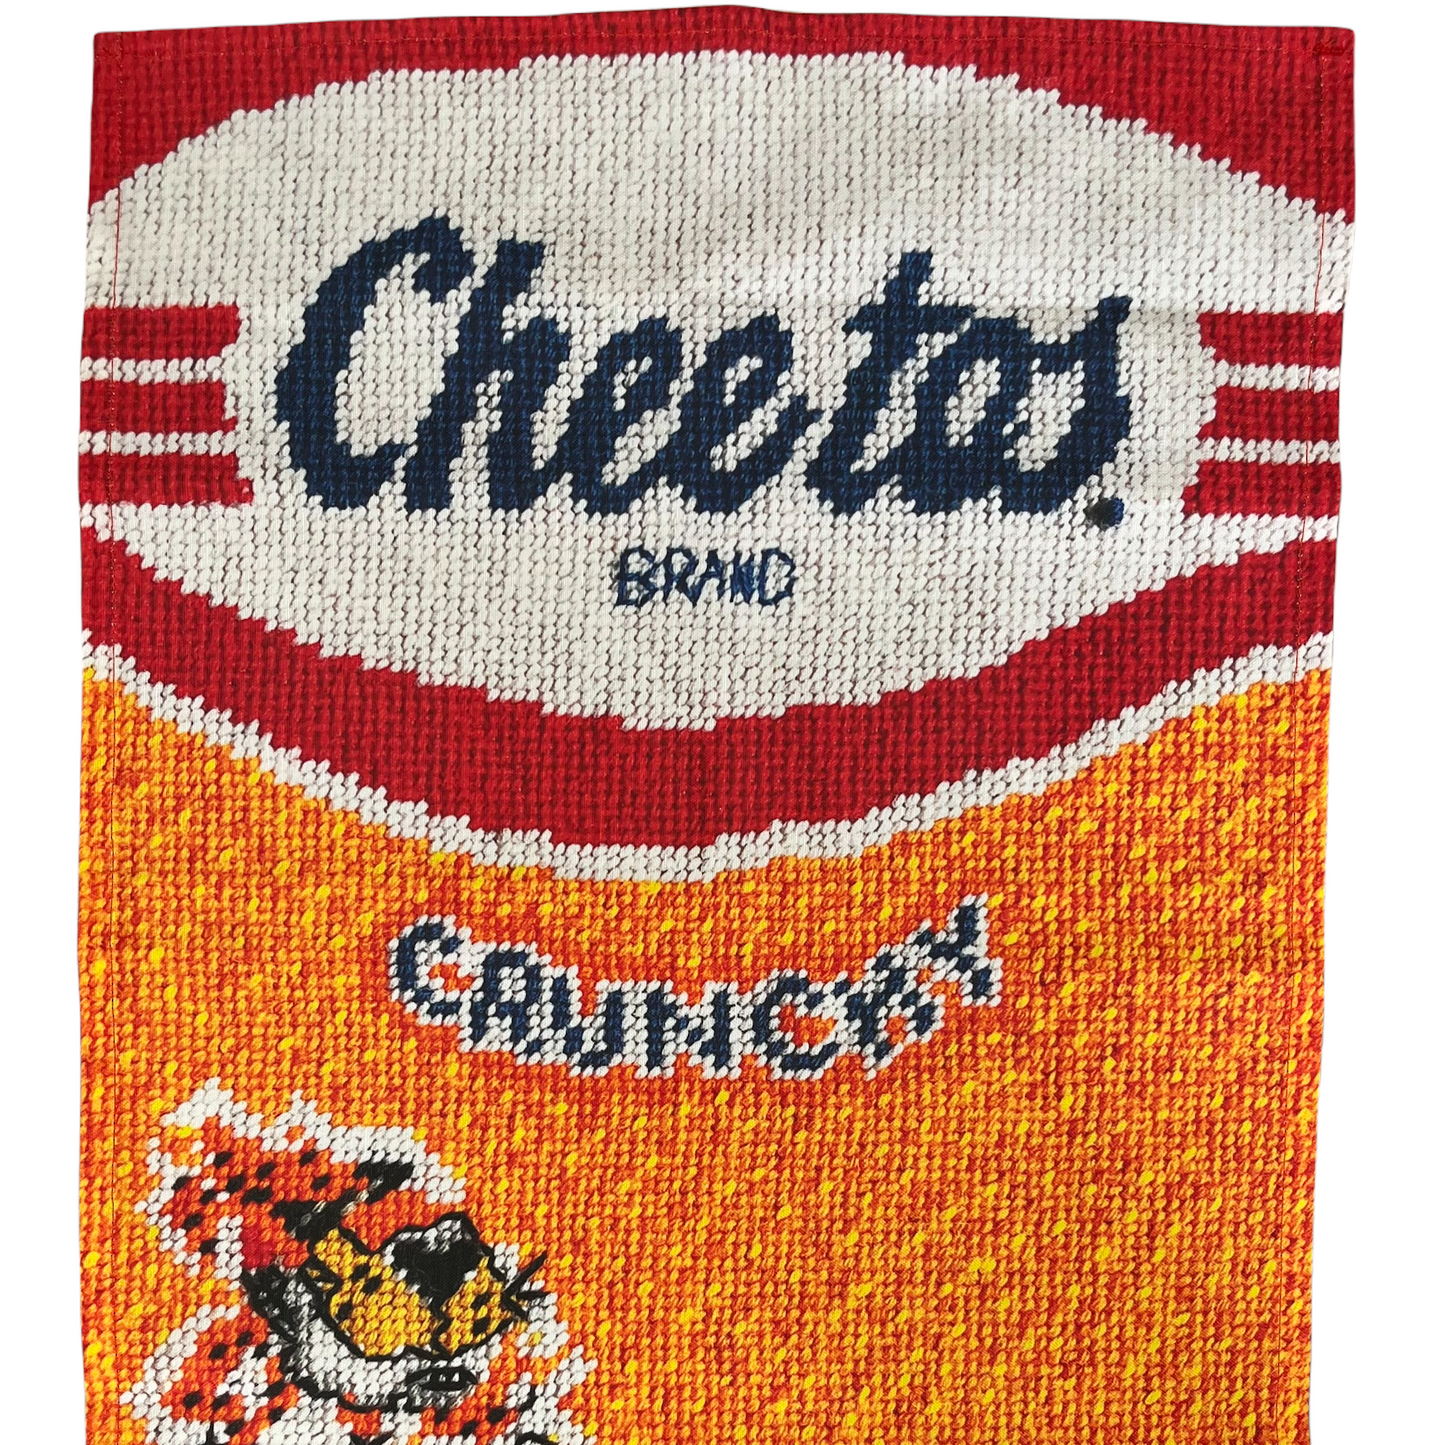 Tea towel with Cheetos crunchy logo and Chester - looks like a bag of Cheetos